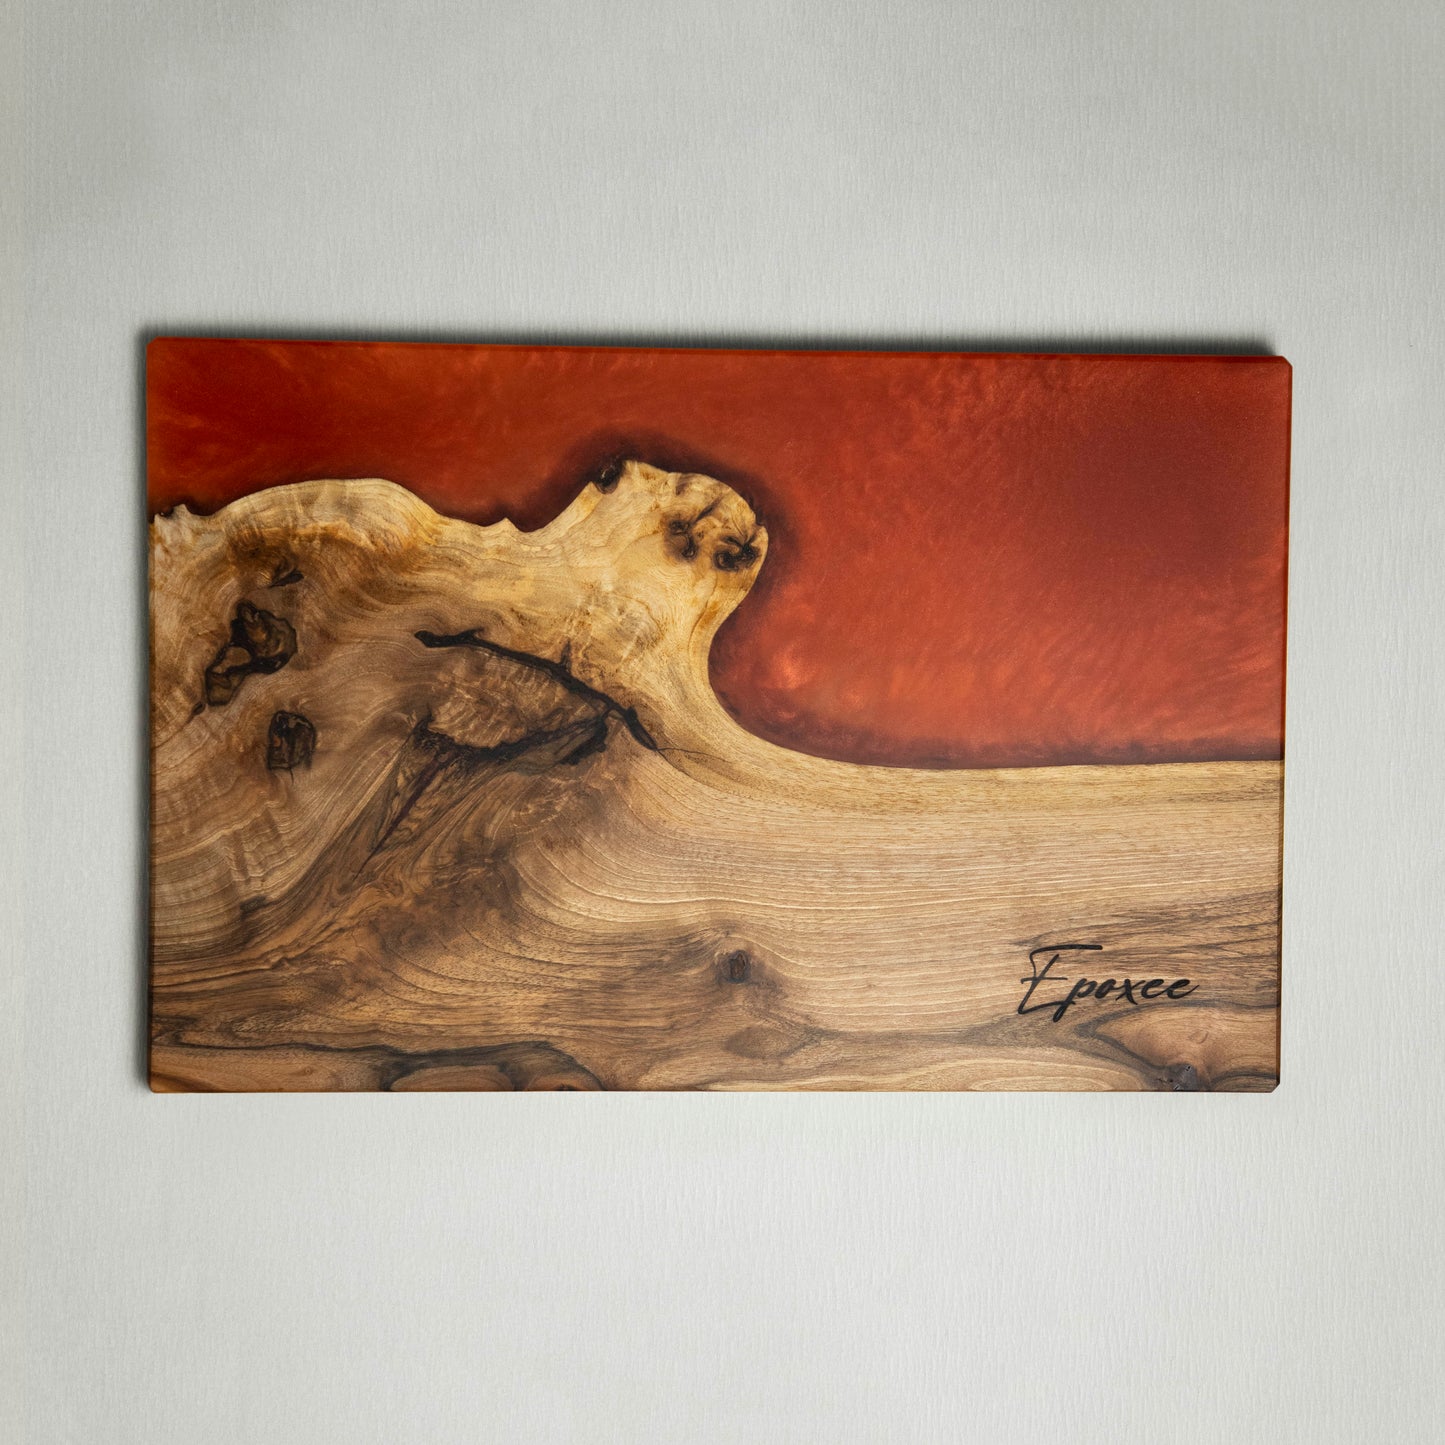 Serving board made from wood and epoxy resin in the color siena orange